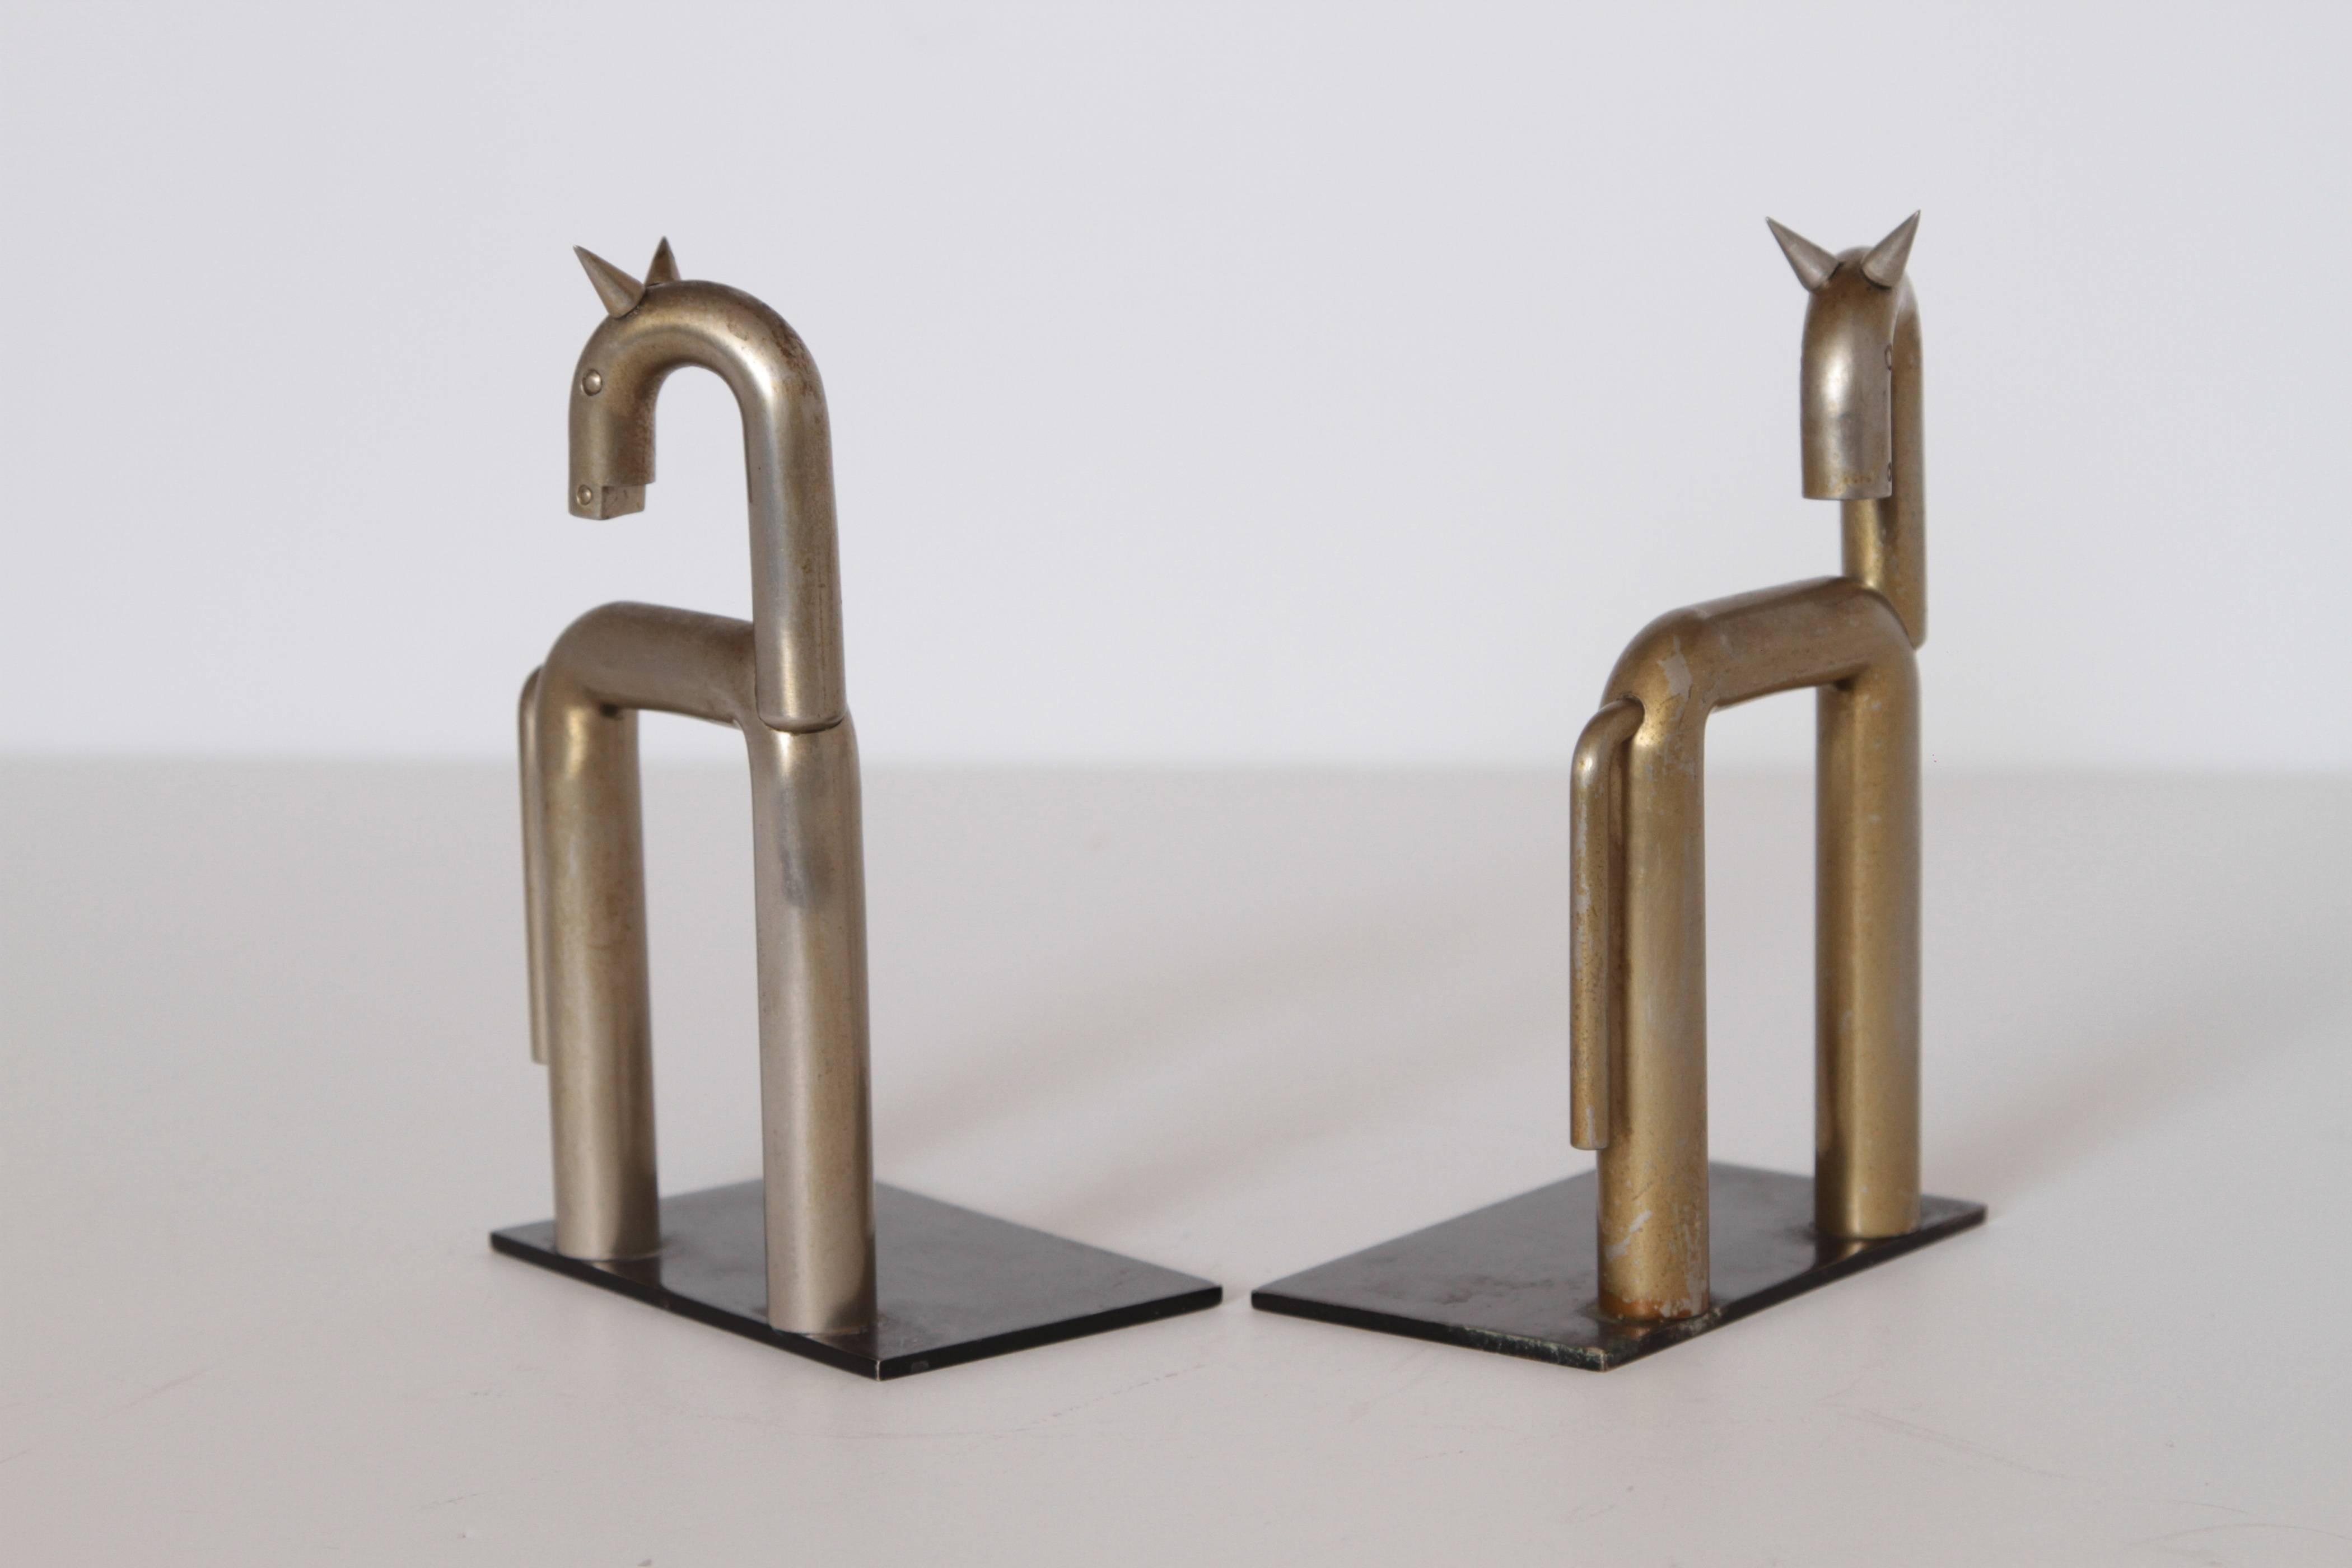 Plated Machine Age Art Deco Walter von Nessen Horse Bookends for Chase, Nickel Plate